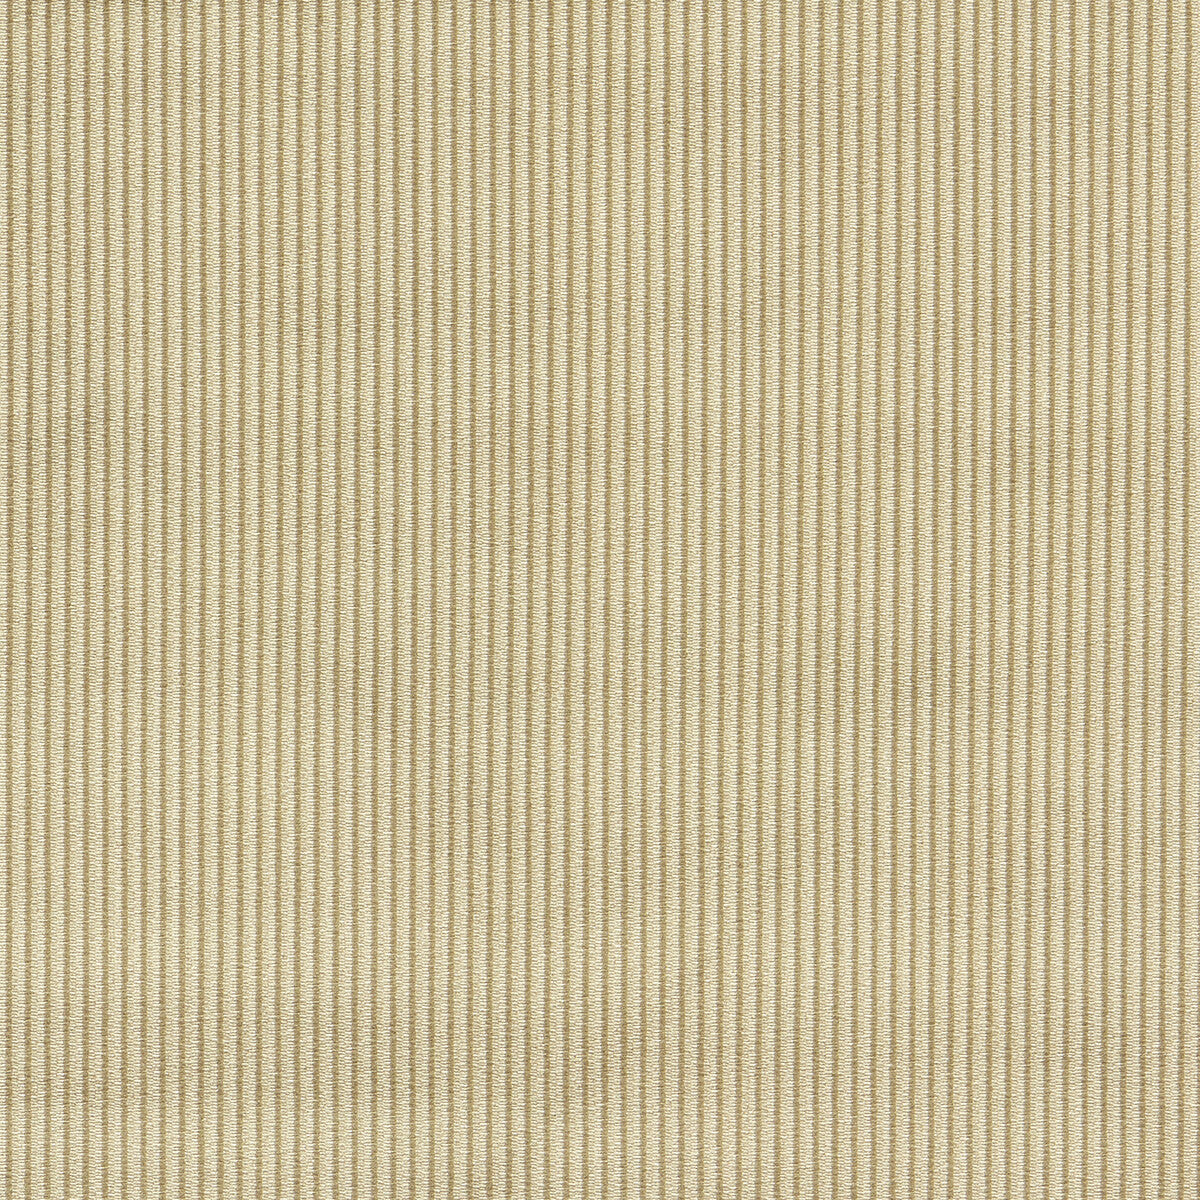 Ashdown fabric in antique color - pattern F1688/01.CAC.0 - by Clarke And Clarke in the Whitworth collection